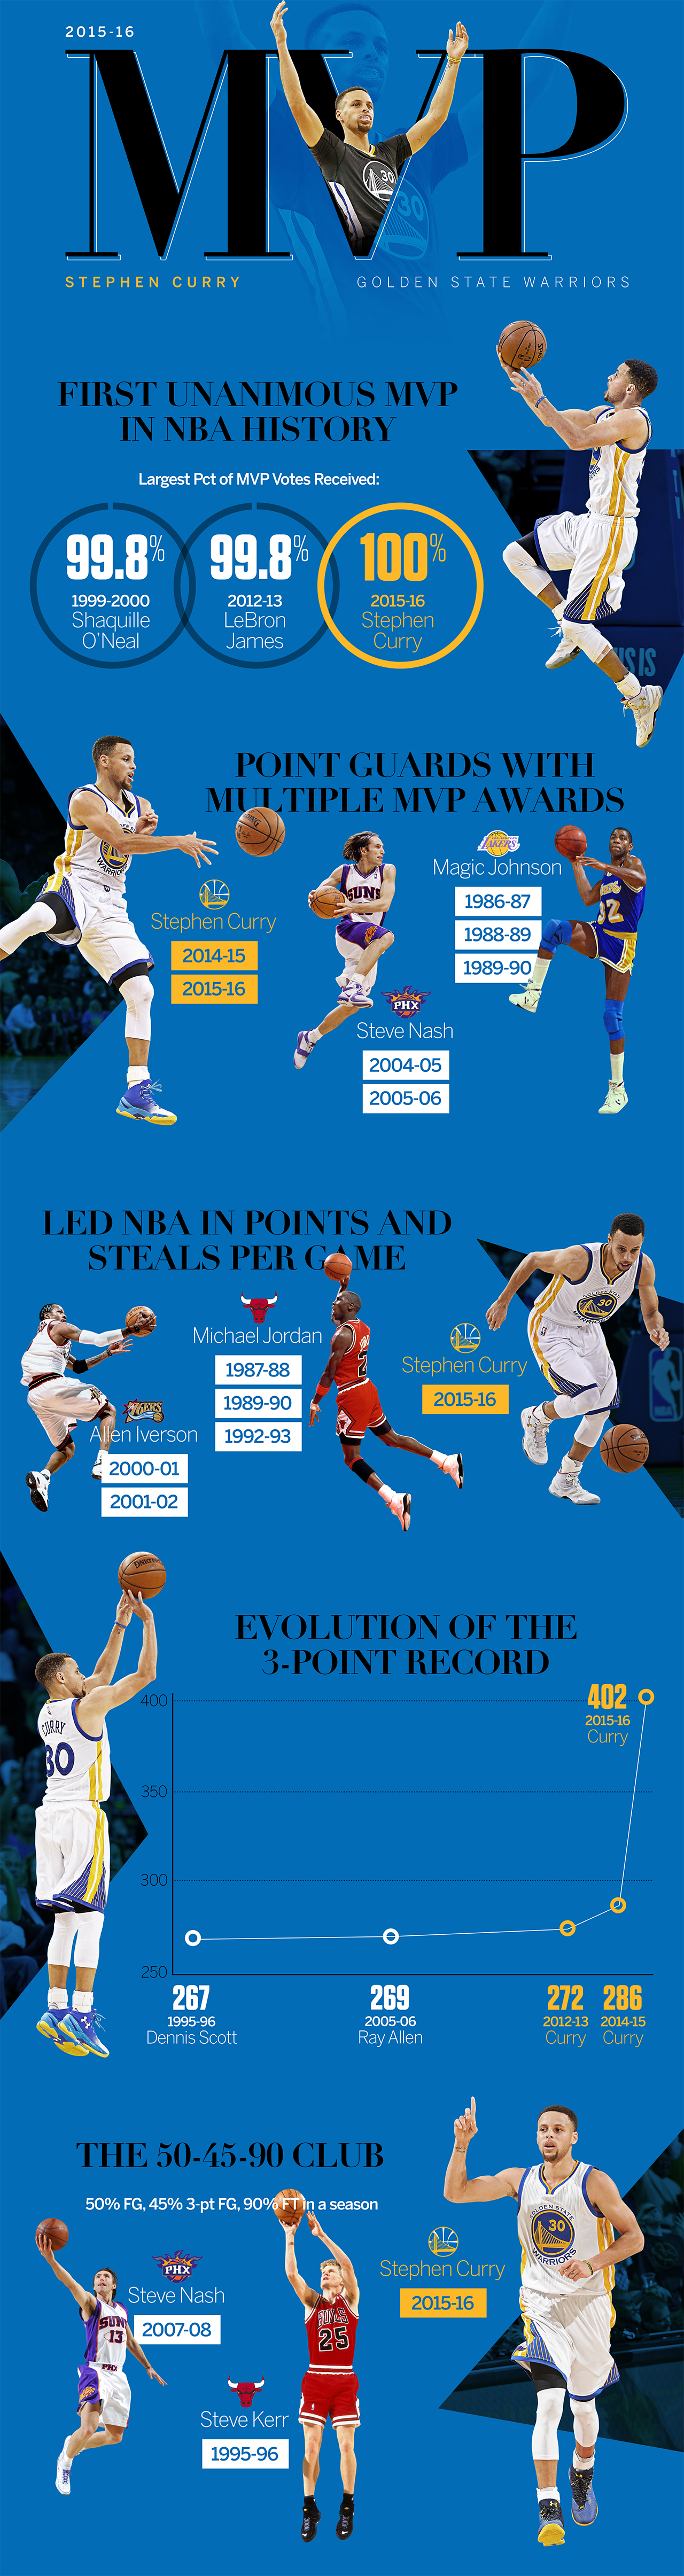 Stephen Curry expected to win NBA MVP Stats & Info ESPN